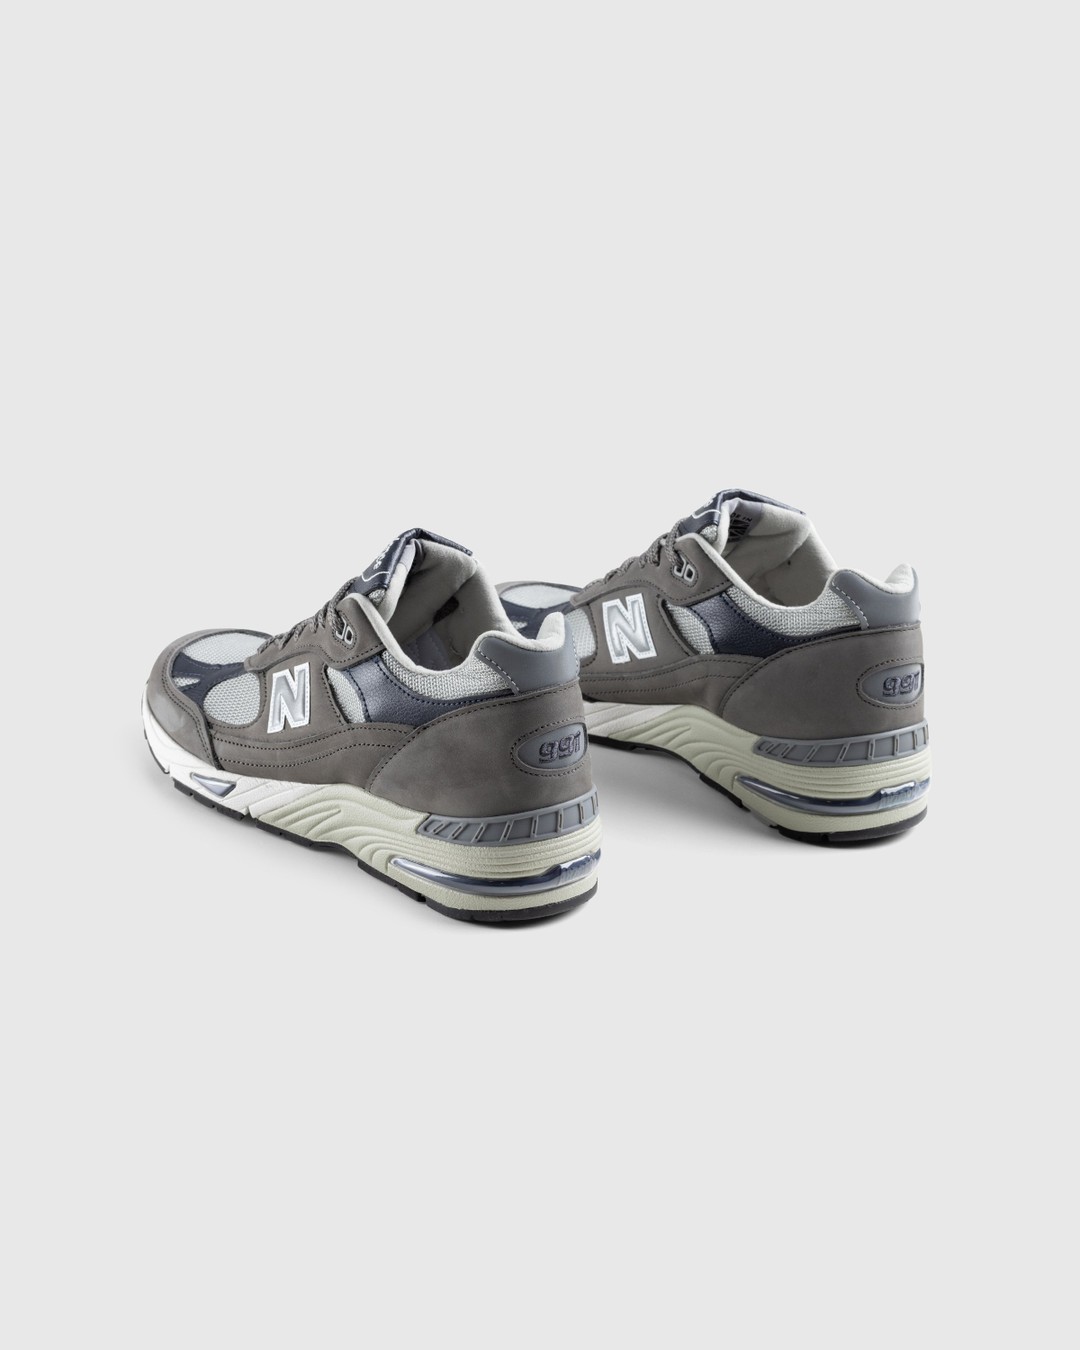 New Balance – M991GNS Grey/Navy - Sneakers - Grey - Image 4